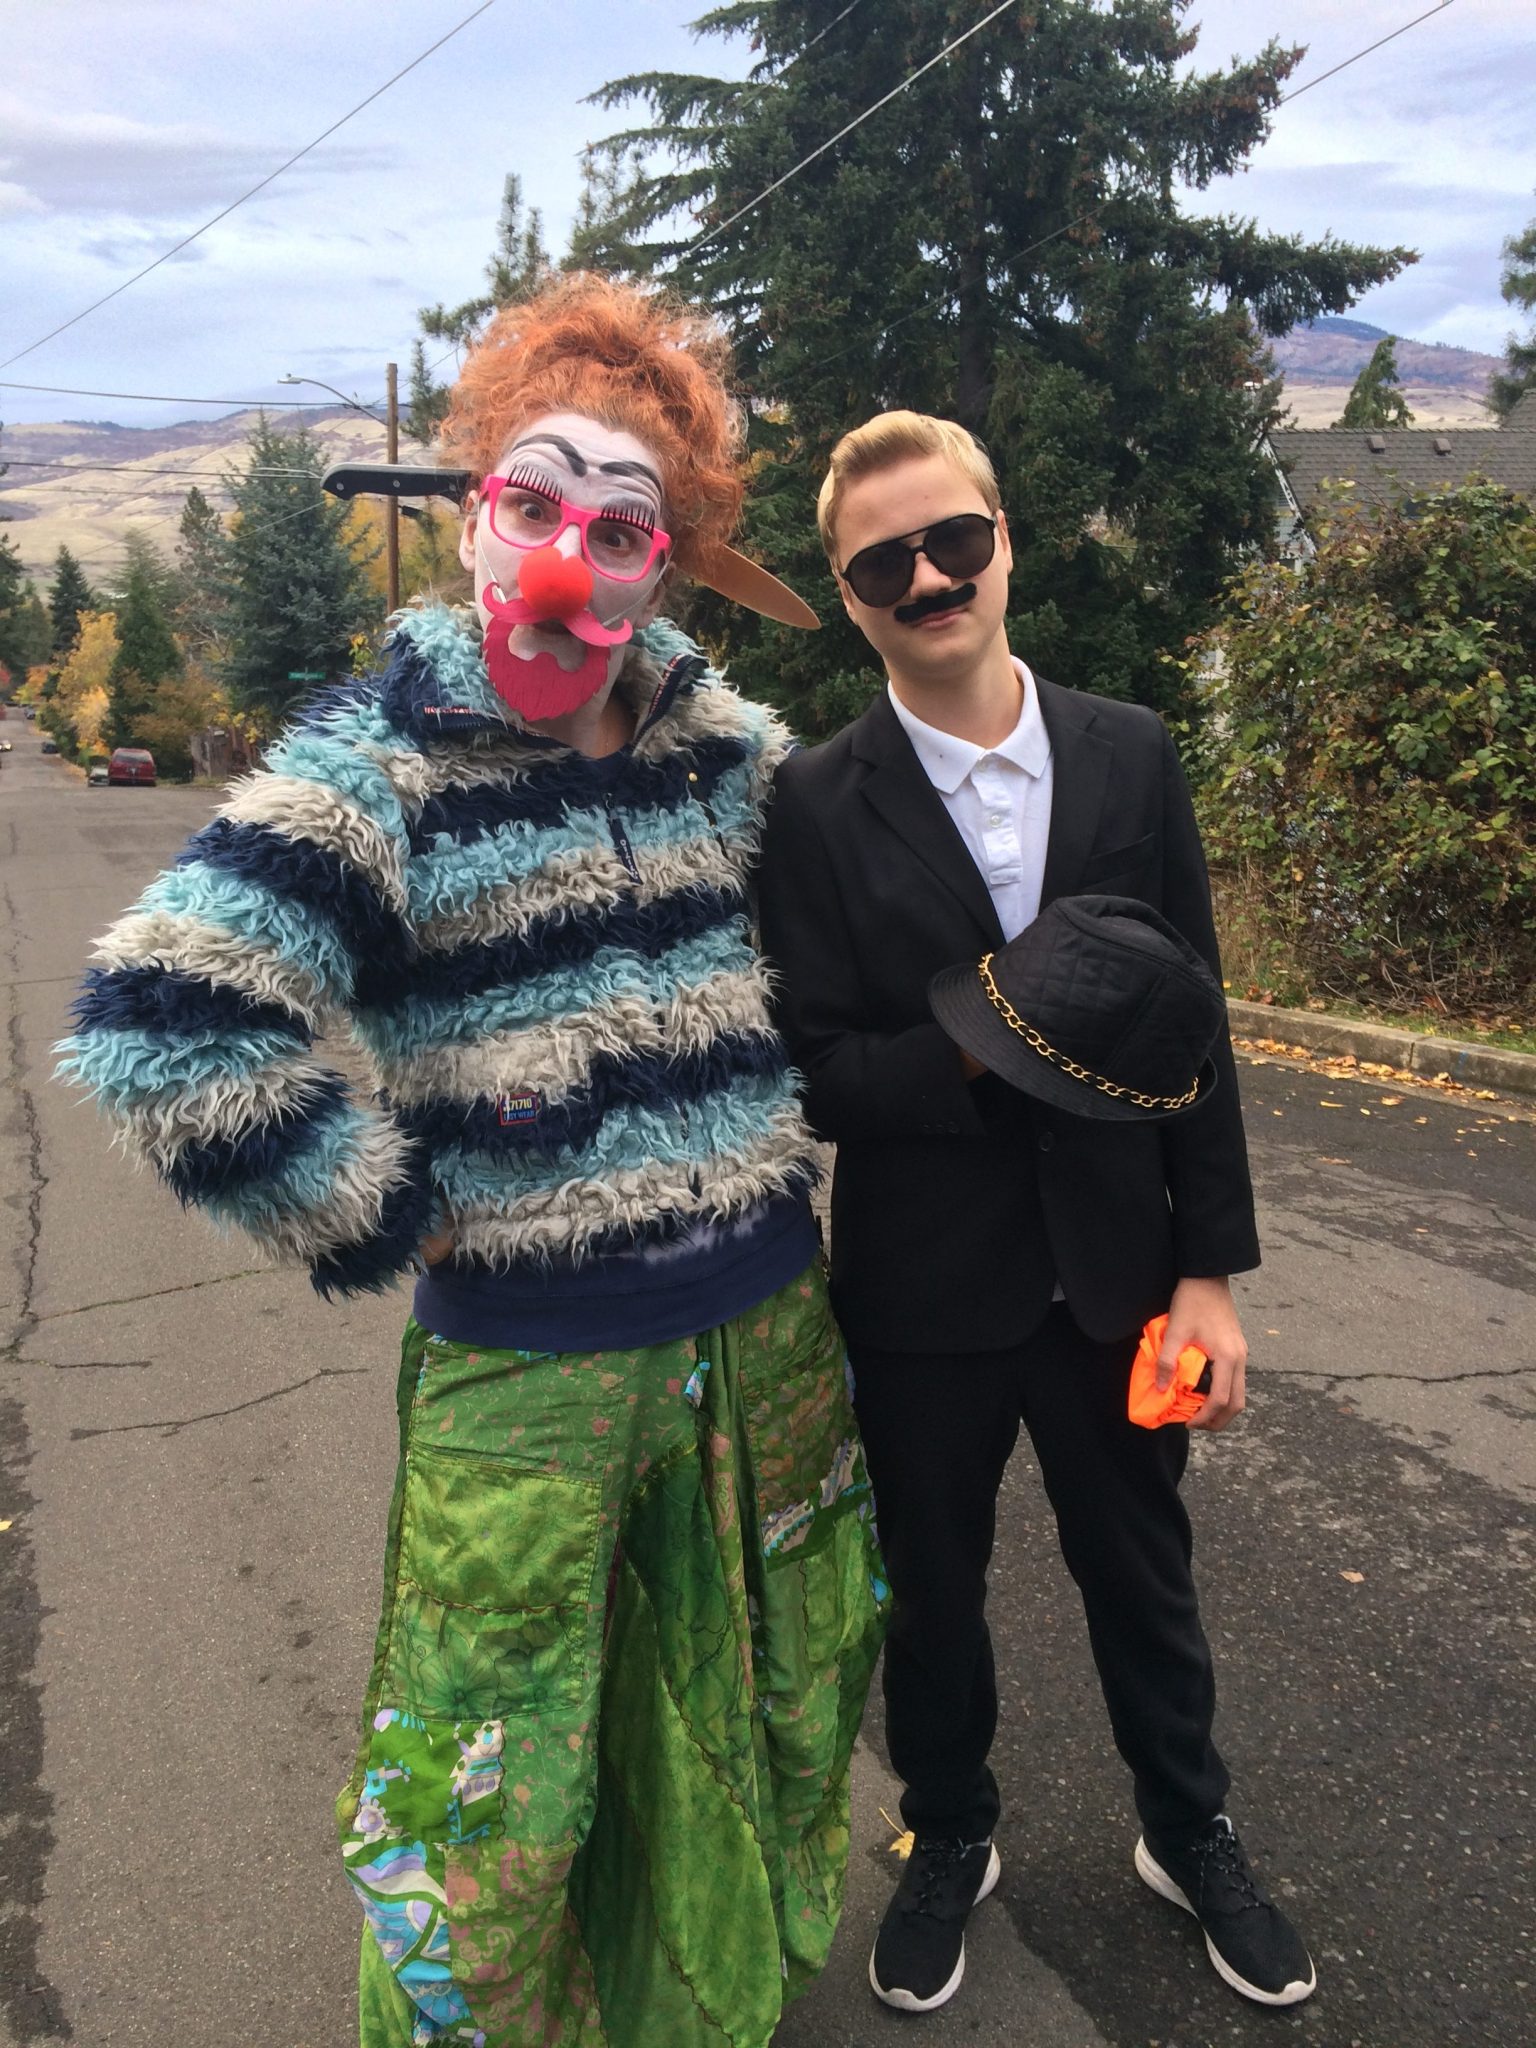 Scenes from the Halloween parade in Ashland, Oregon